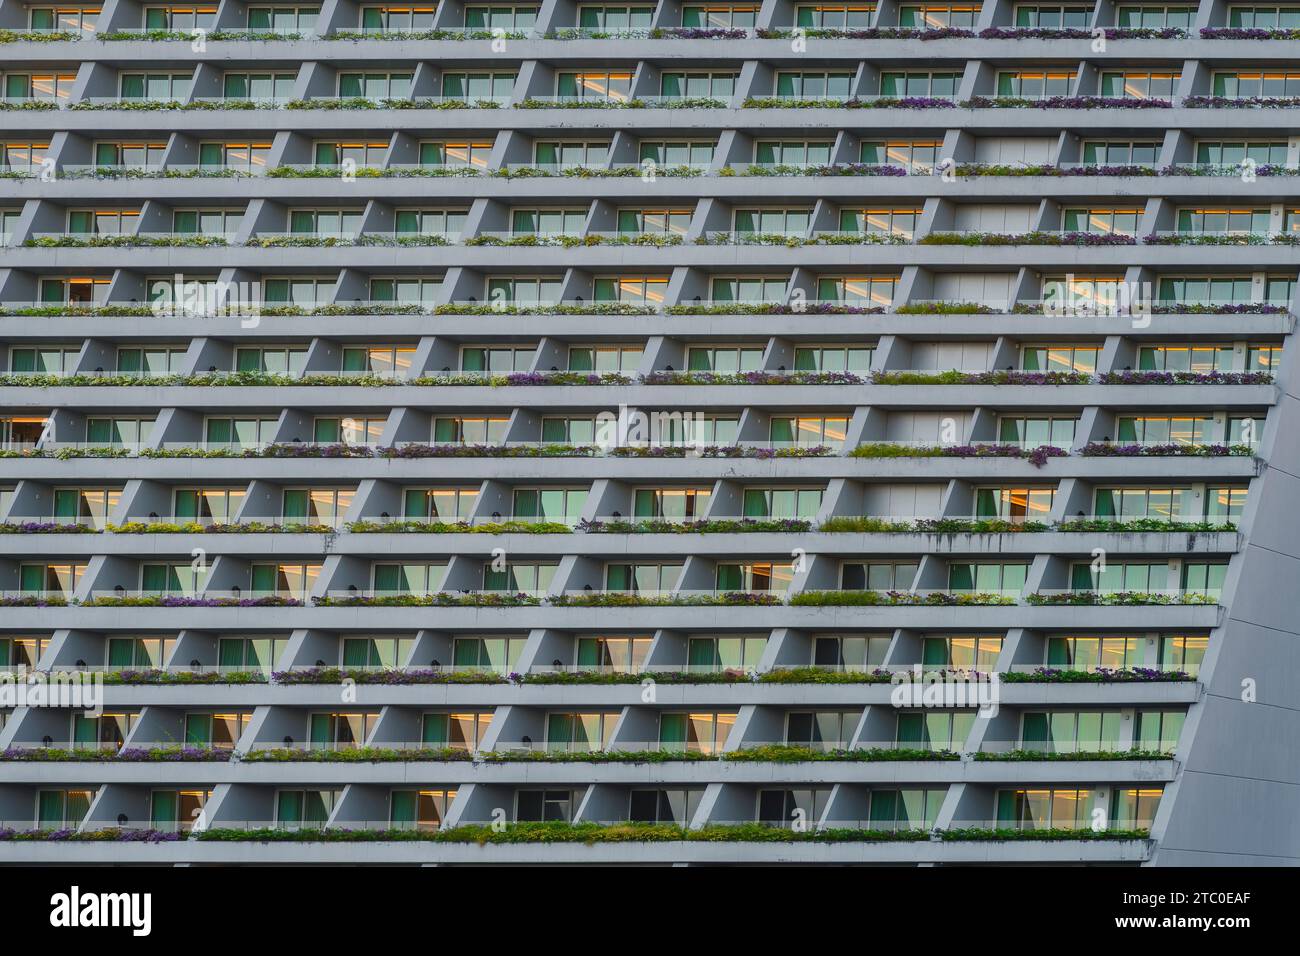 A modern-style building with multiple windows and grassy balconies in Singapore Stock Photo